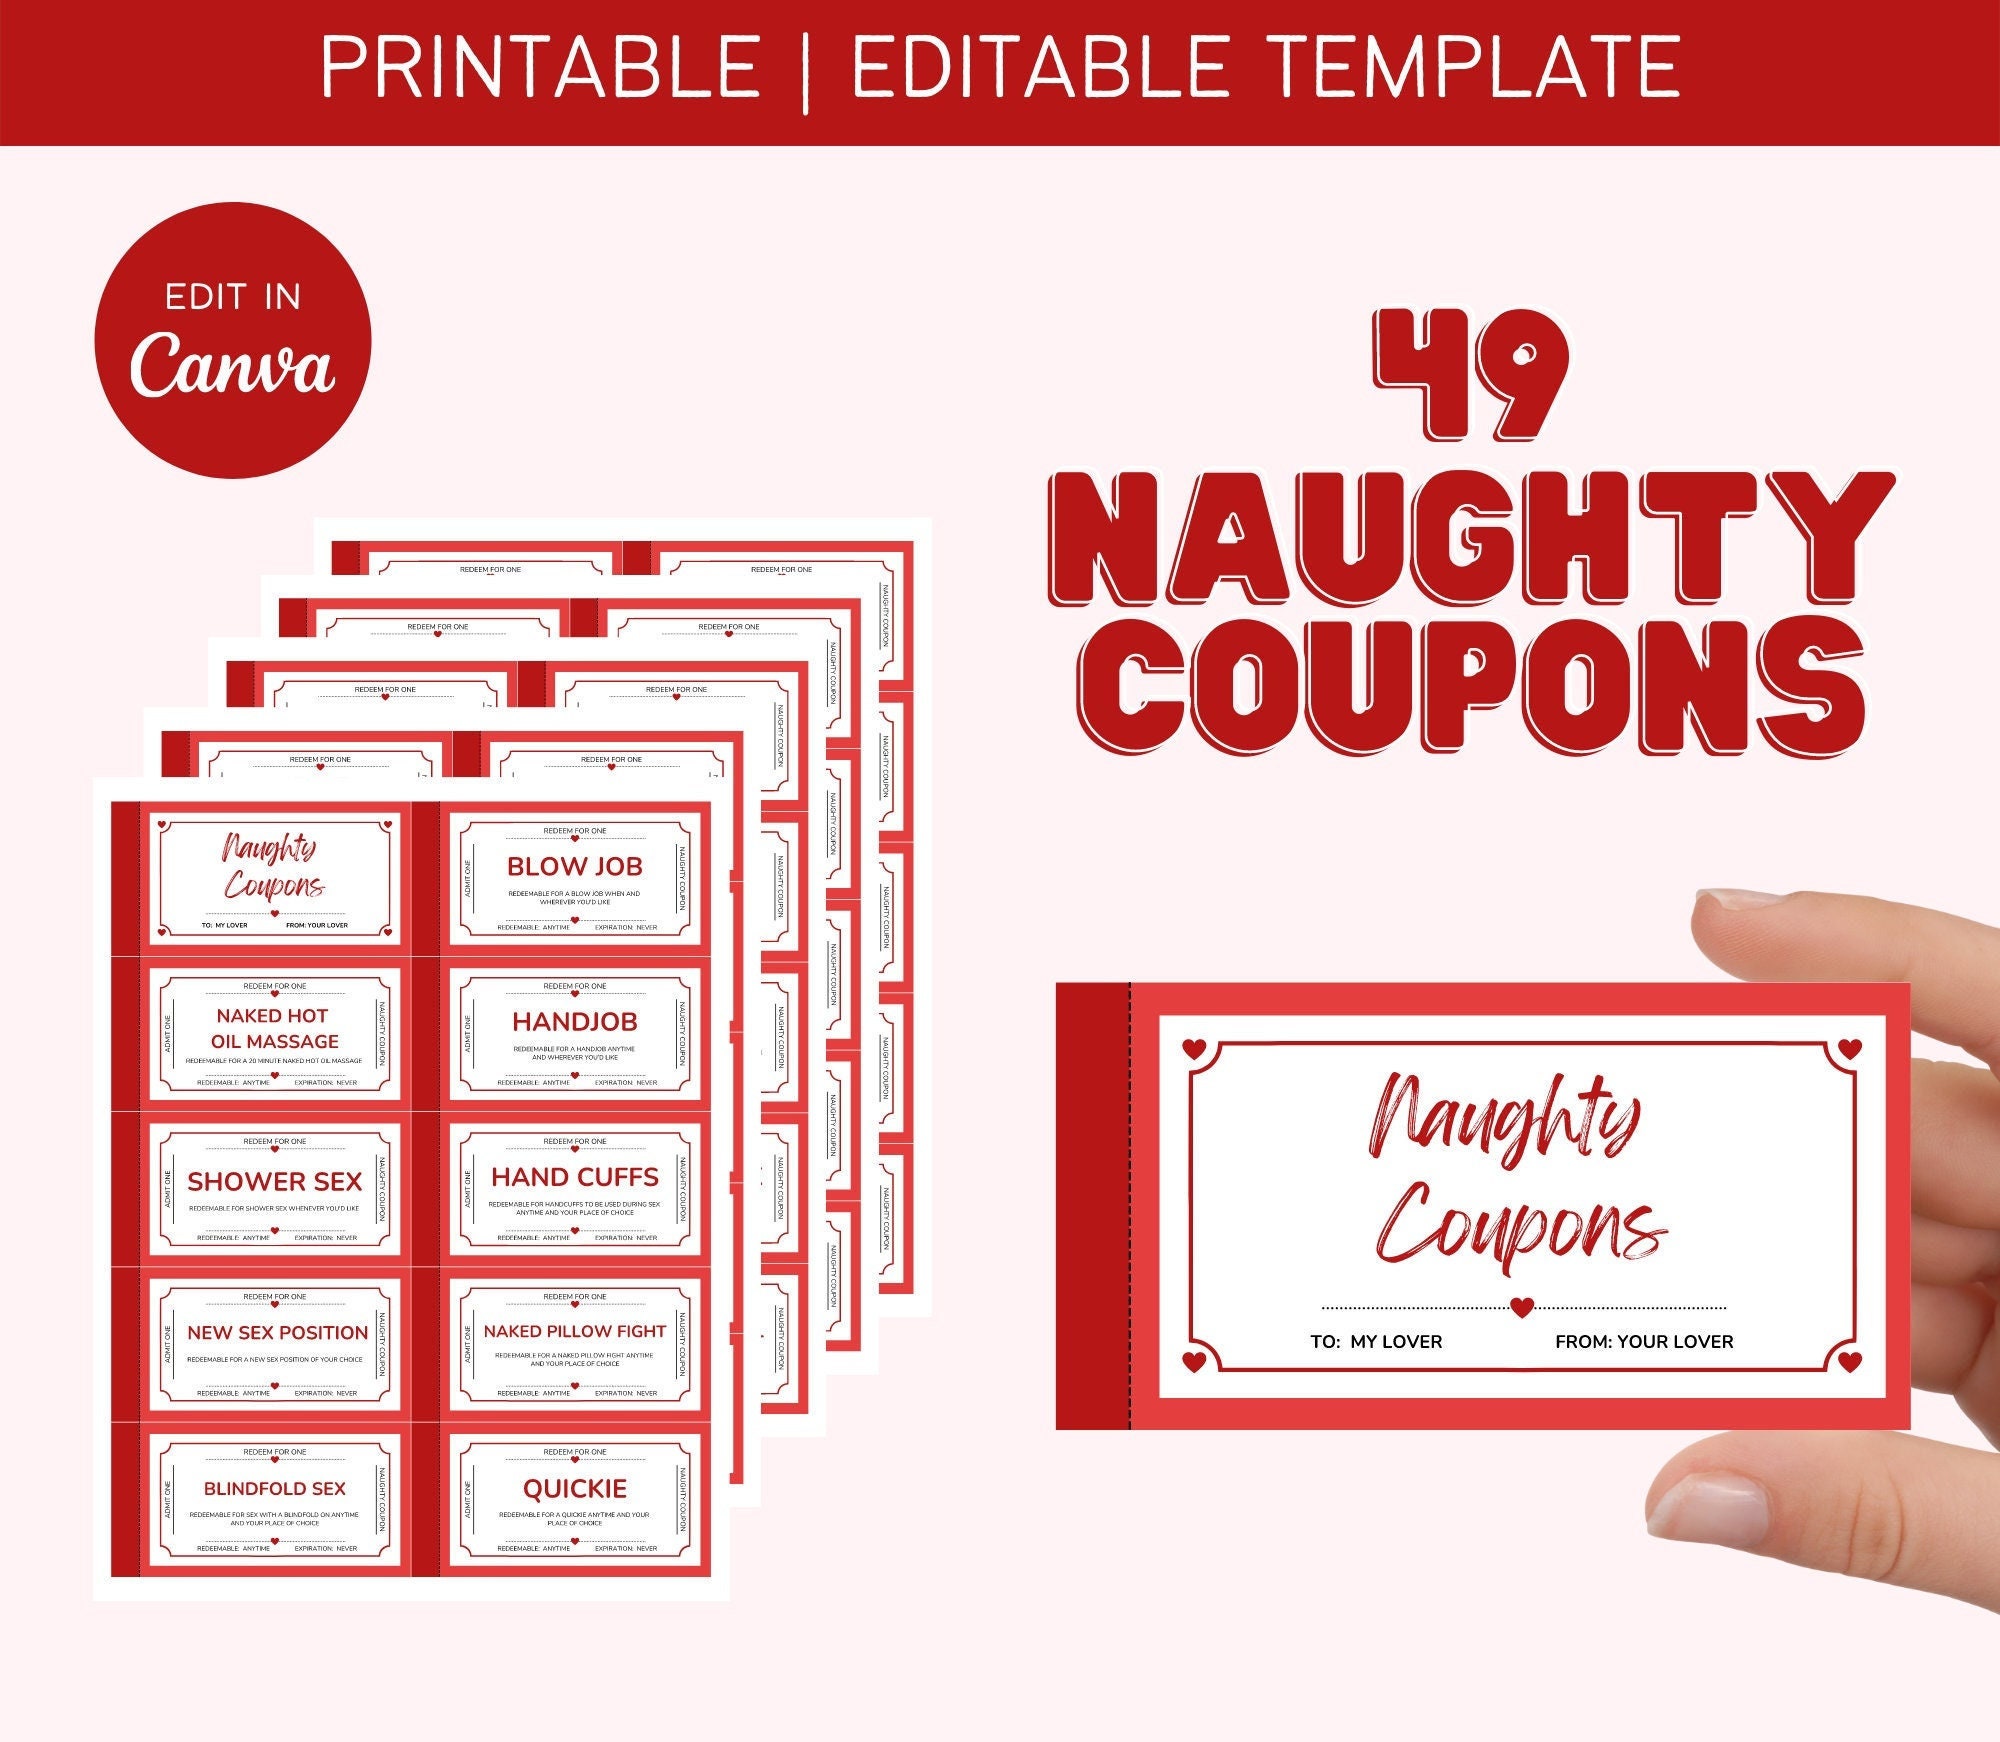 naughty sex vouchers or coupons homemade